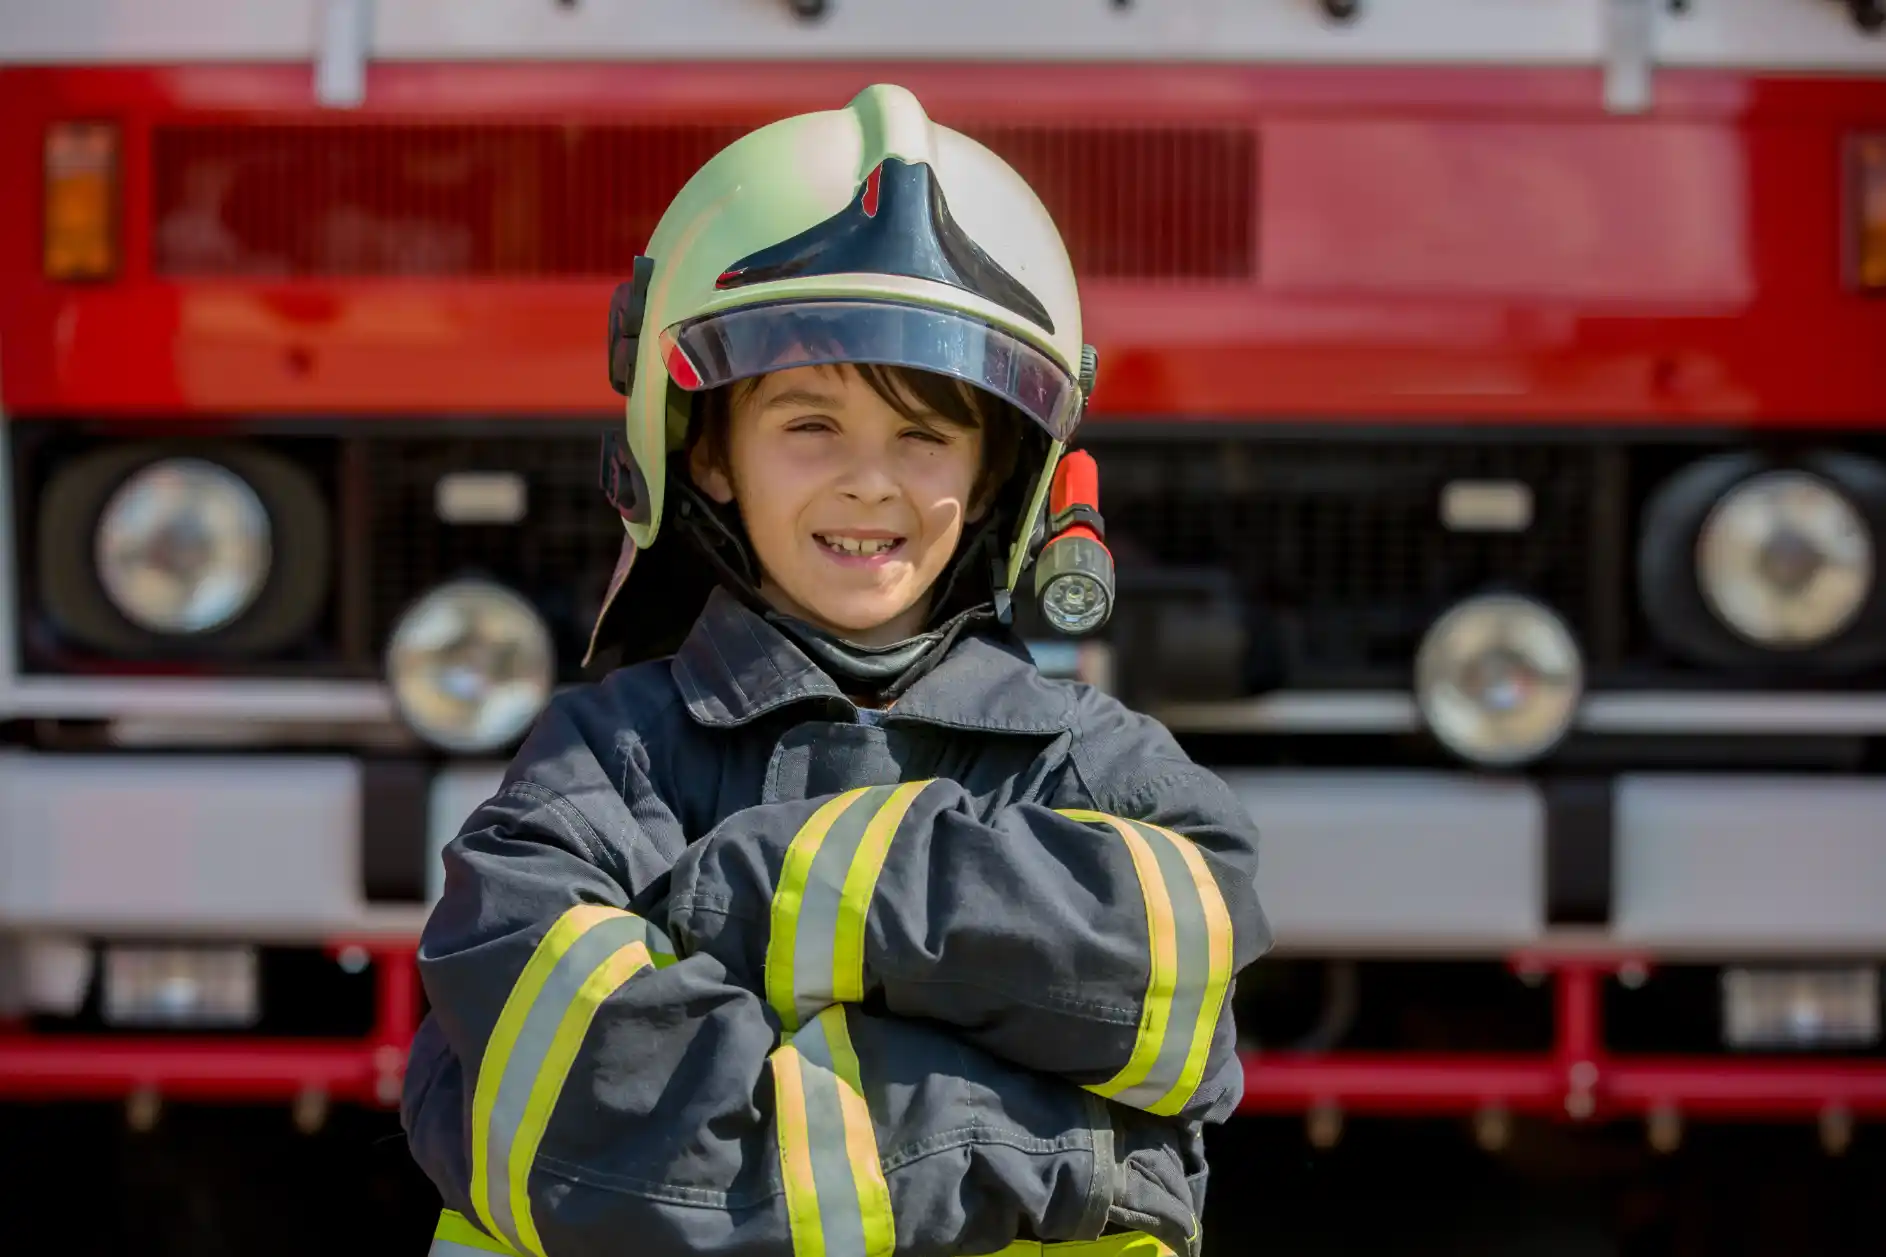 School trip to fire station School trip to fire station Best School Trip Ideas for Students Across All Age Groups